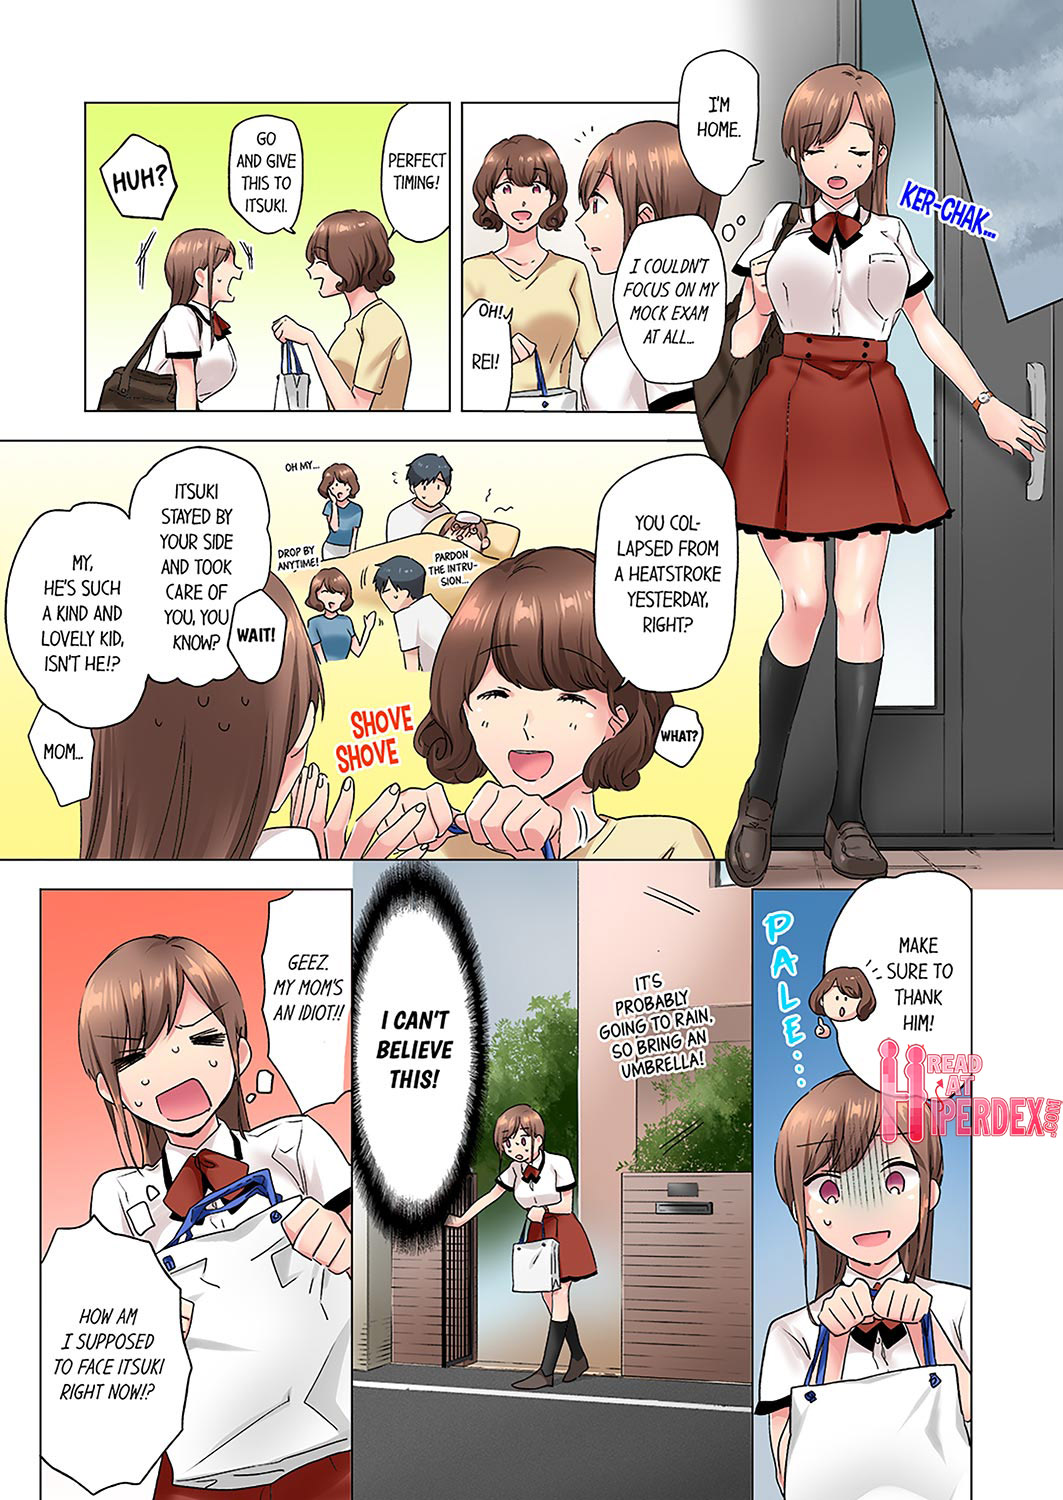 A Scorching Hot Day with A Broken Air Conditioner. If I Keep Having Sex with My Sweaty Childhood Friend… - Chapter 4 Page 5